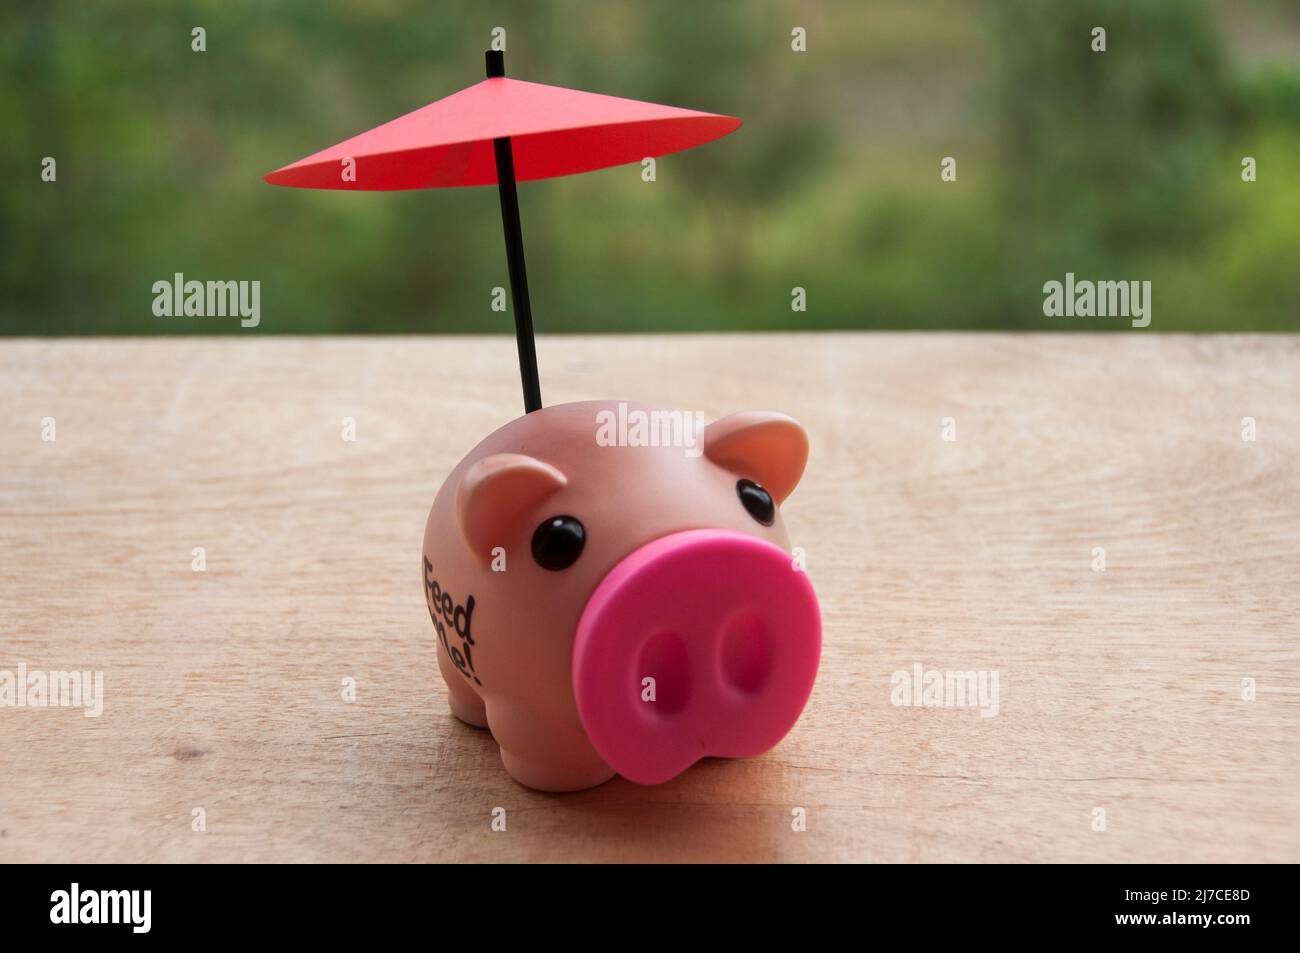 Small red umbrella over piggy bank on wooden table. Financial safety and investment concept. Stock Photo